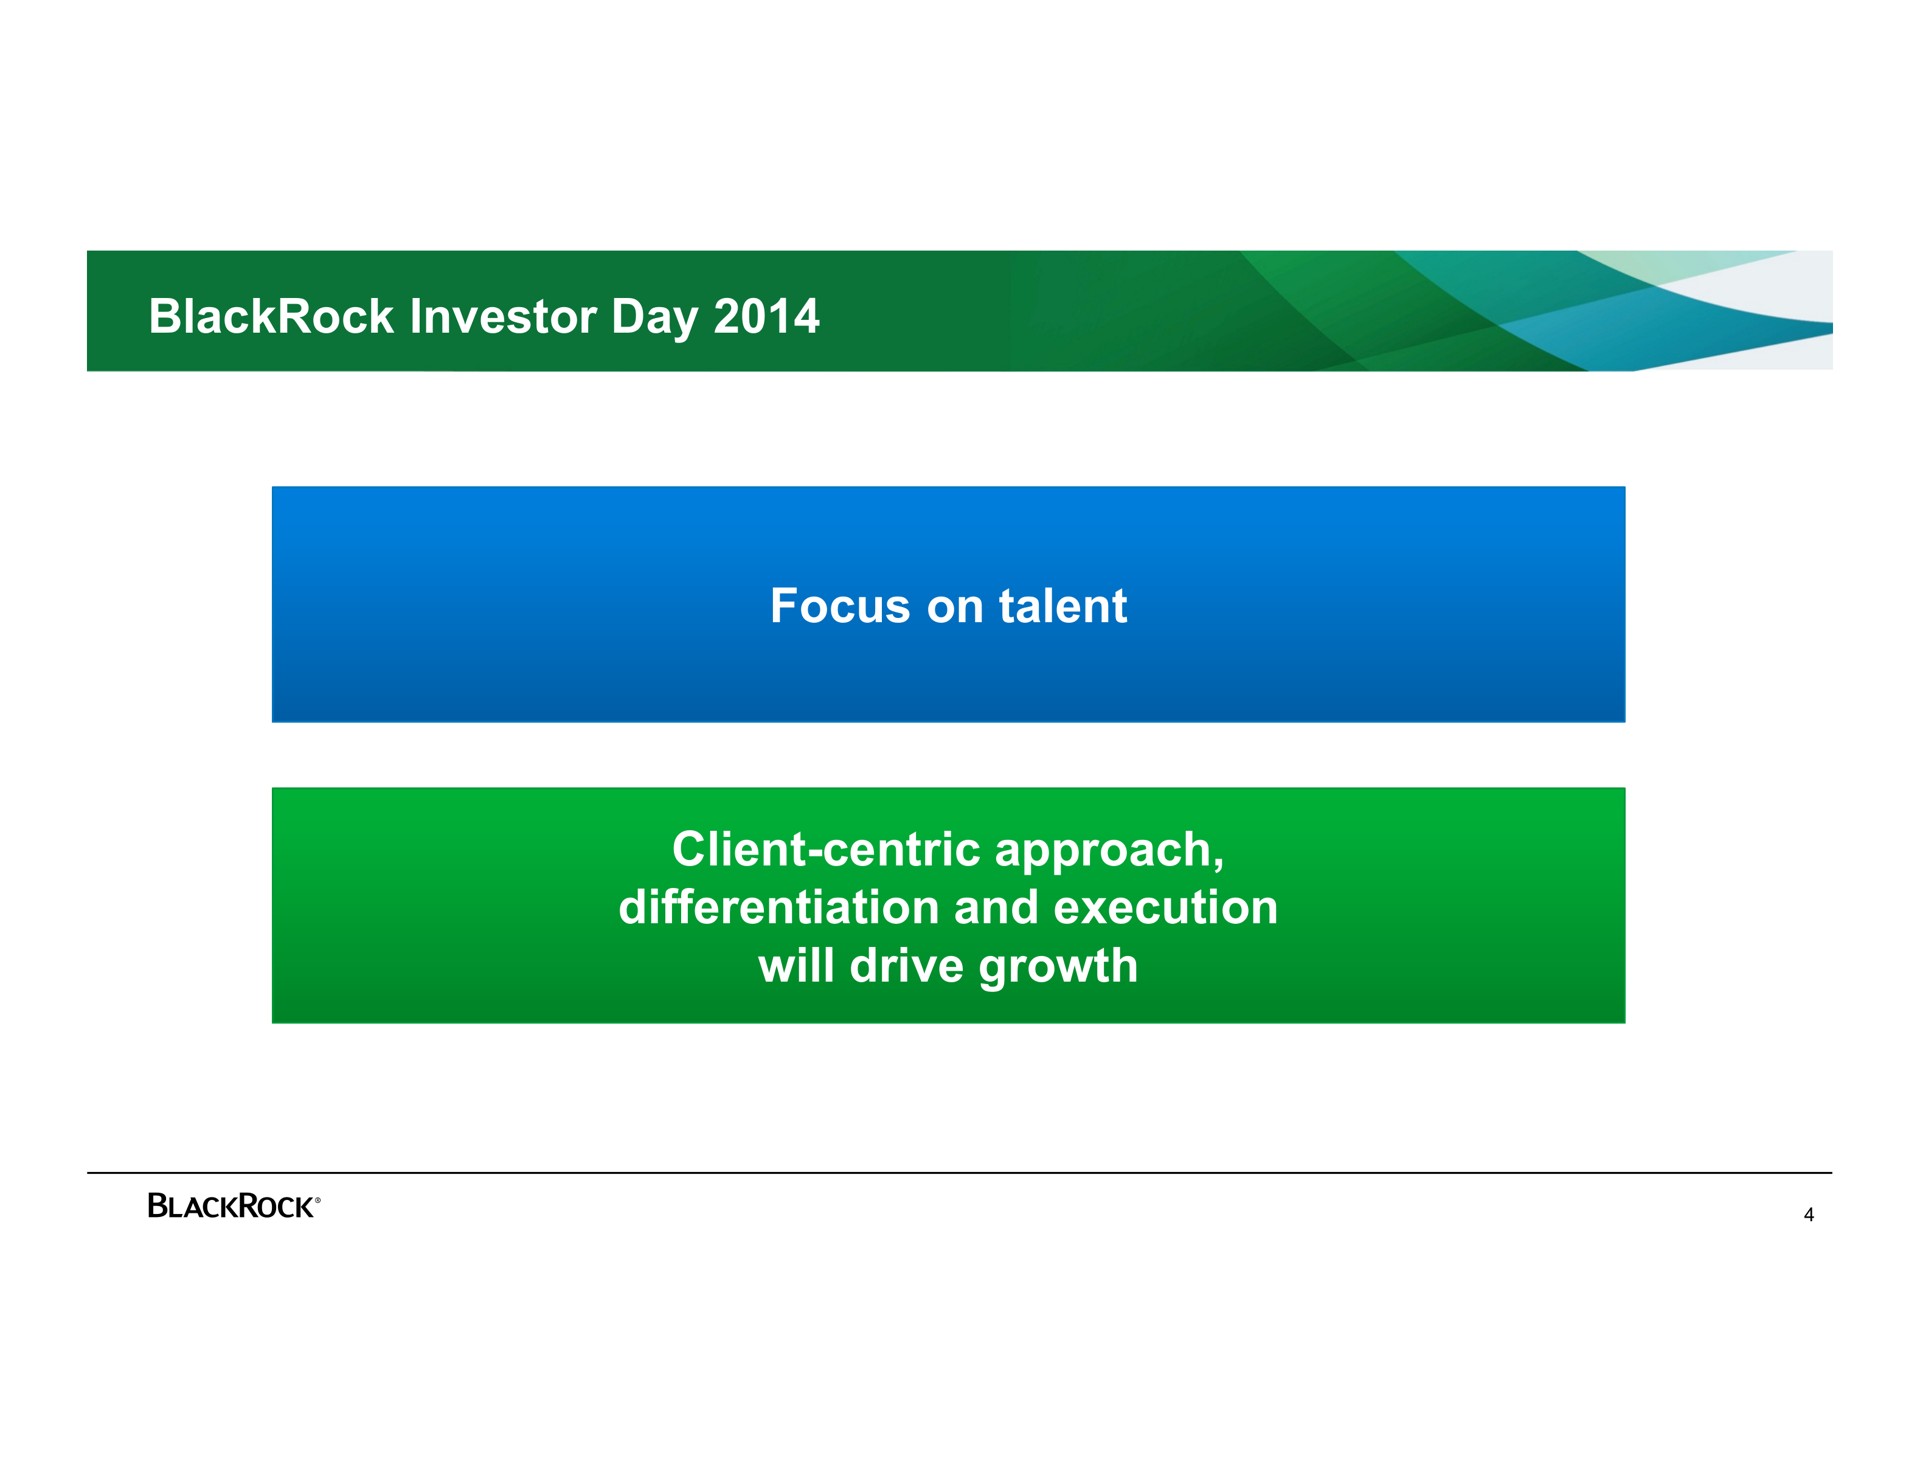 investor day focus on talent client centric approach differentiation and execution will drive growth | BlackRock